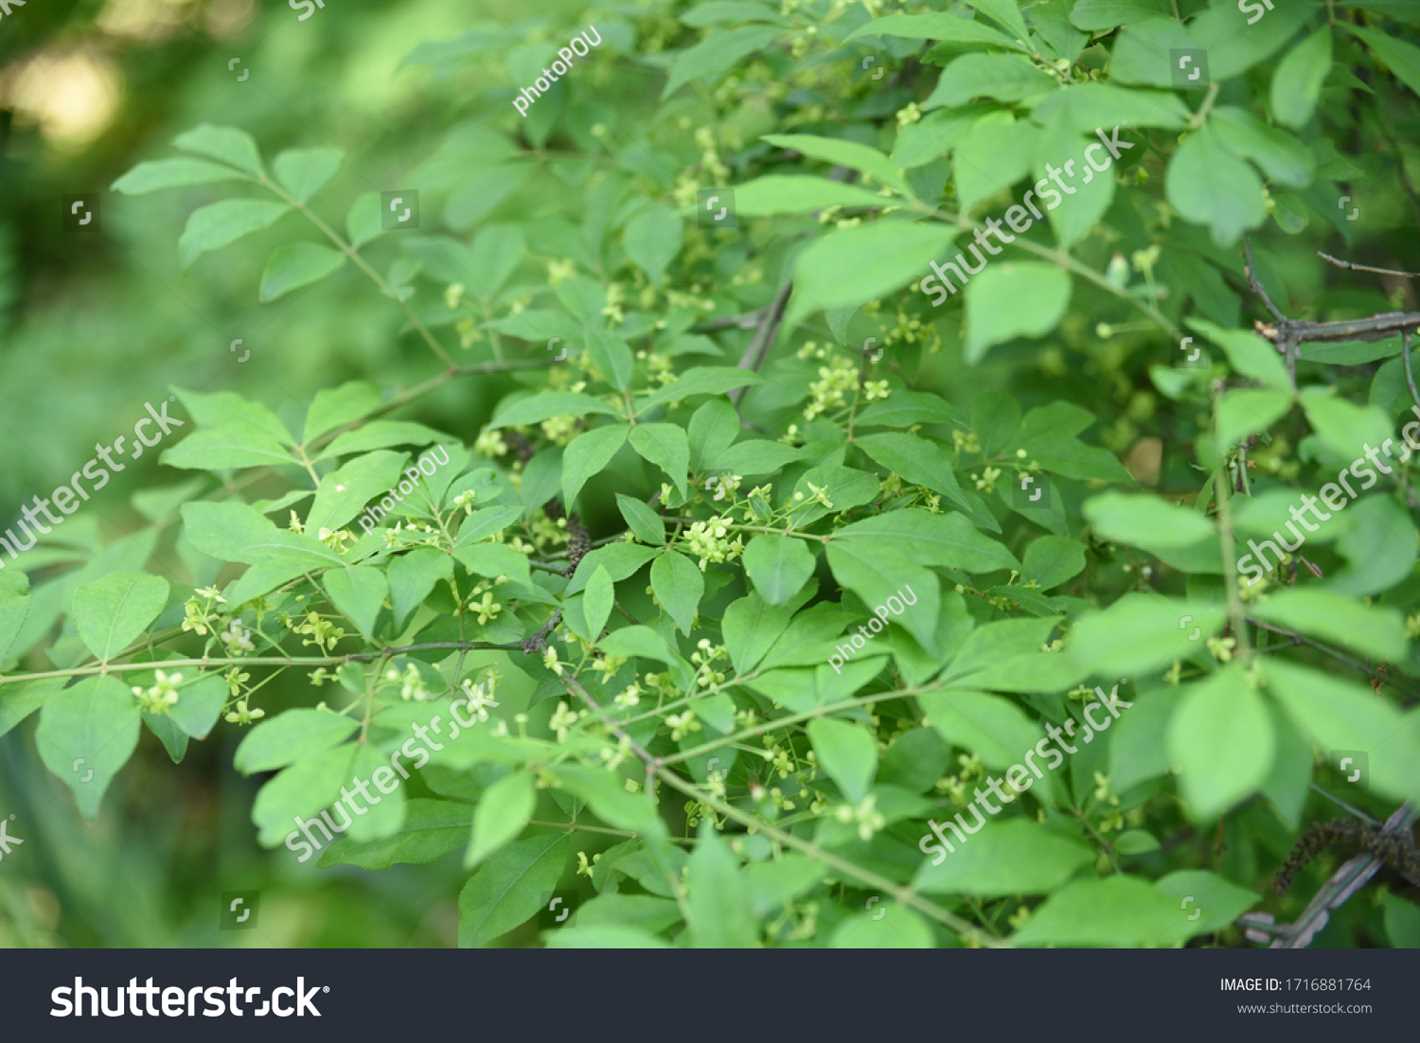 Birch Leaves: Characteristics and Uses